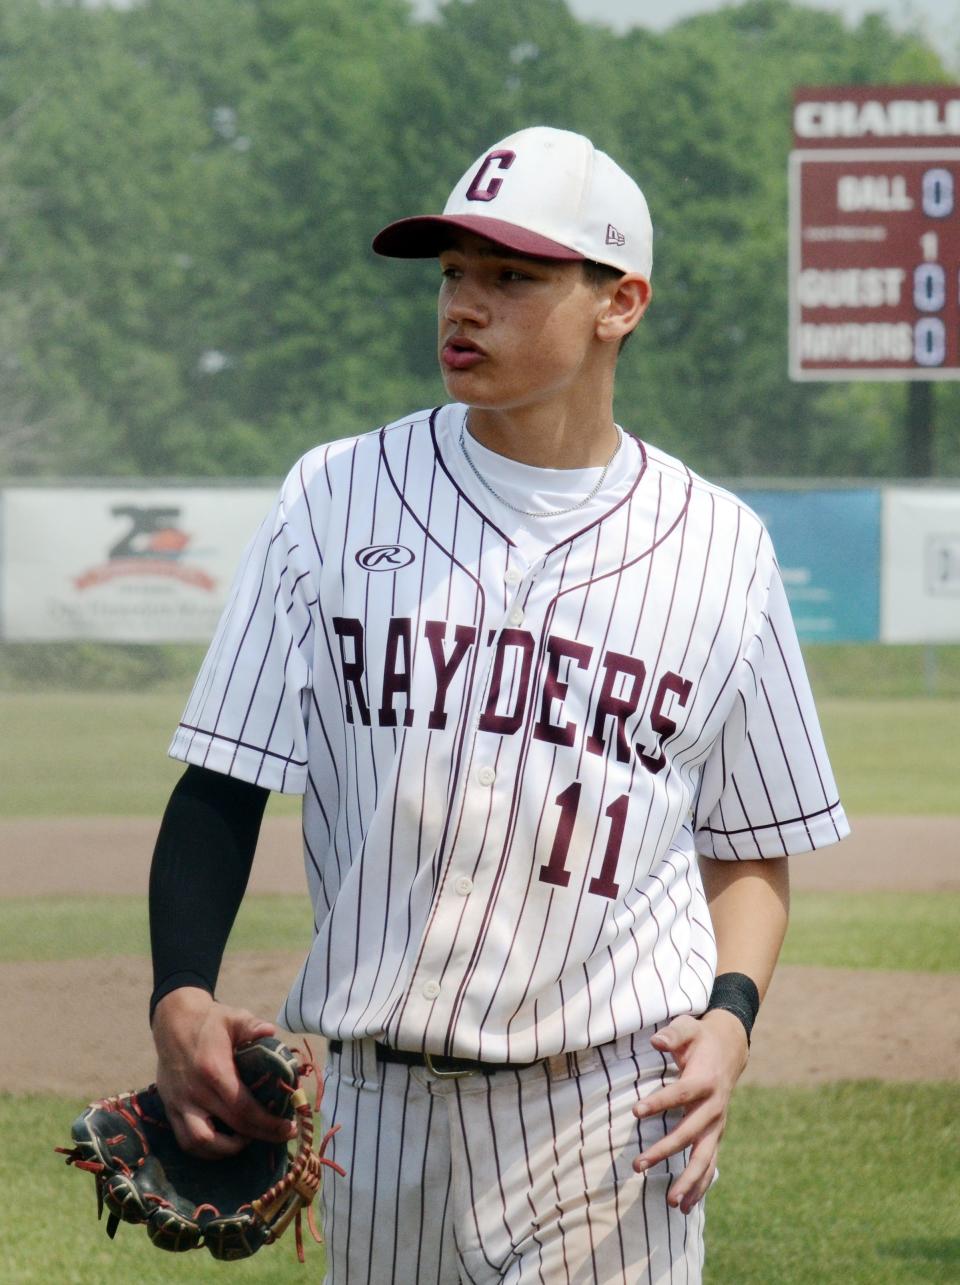 Charlevoix's Owen Waha hasn't even met a one ERA for the season, with just a 0.712 ERA through nearly 40 innings.